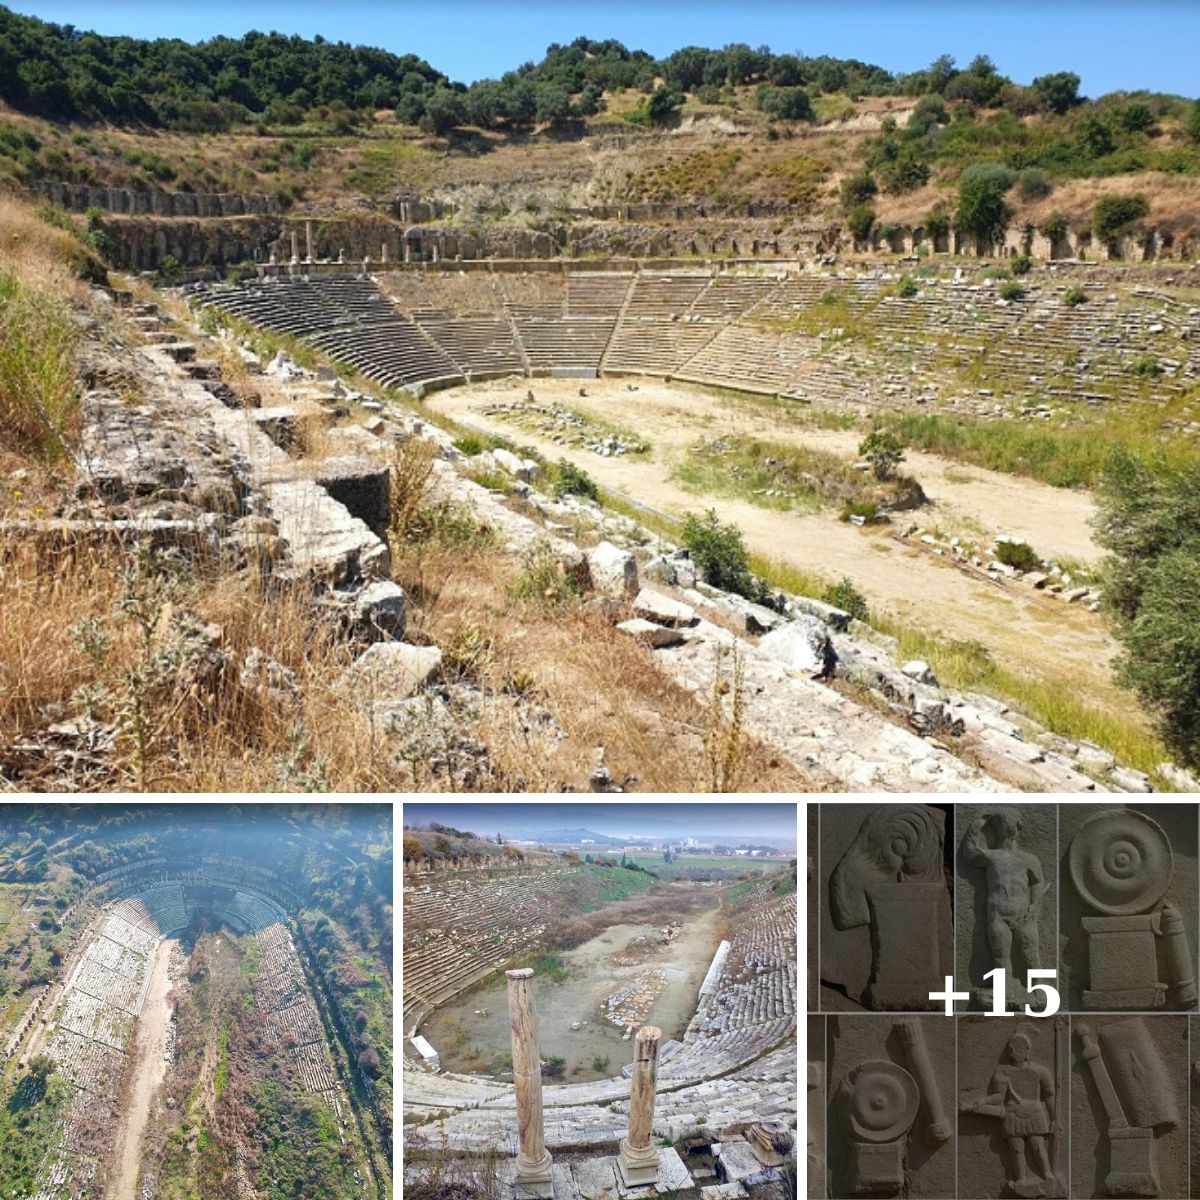 Amazing constructions about ancient Greek stadium excavations and the story behind them